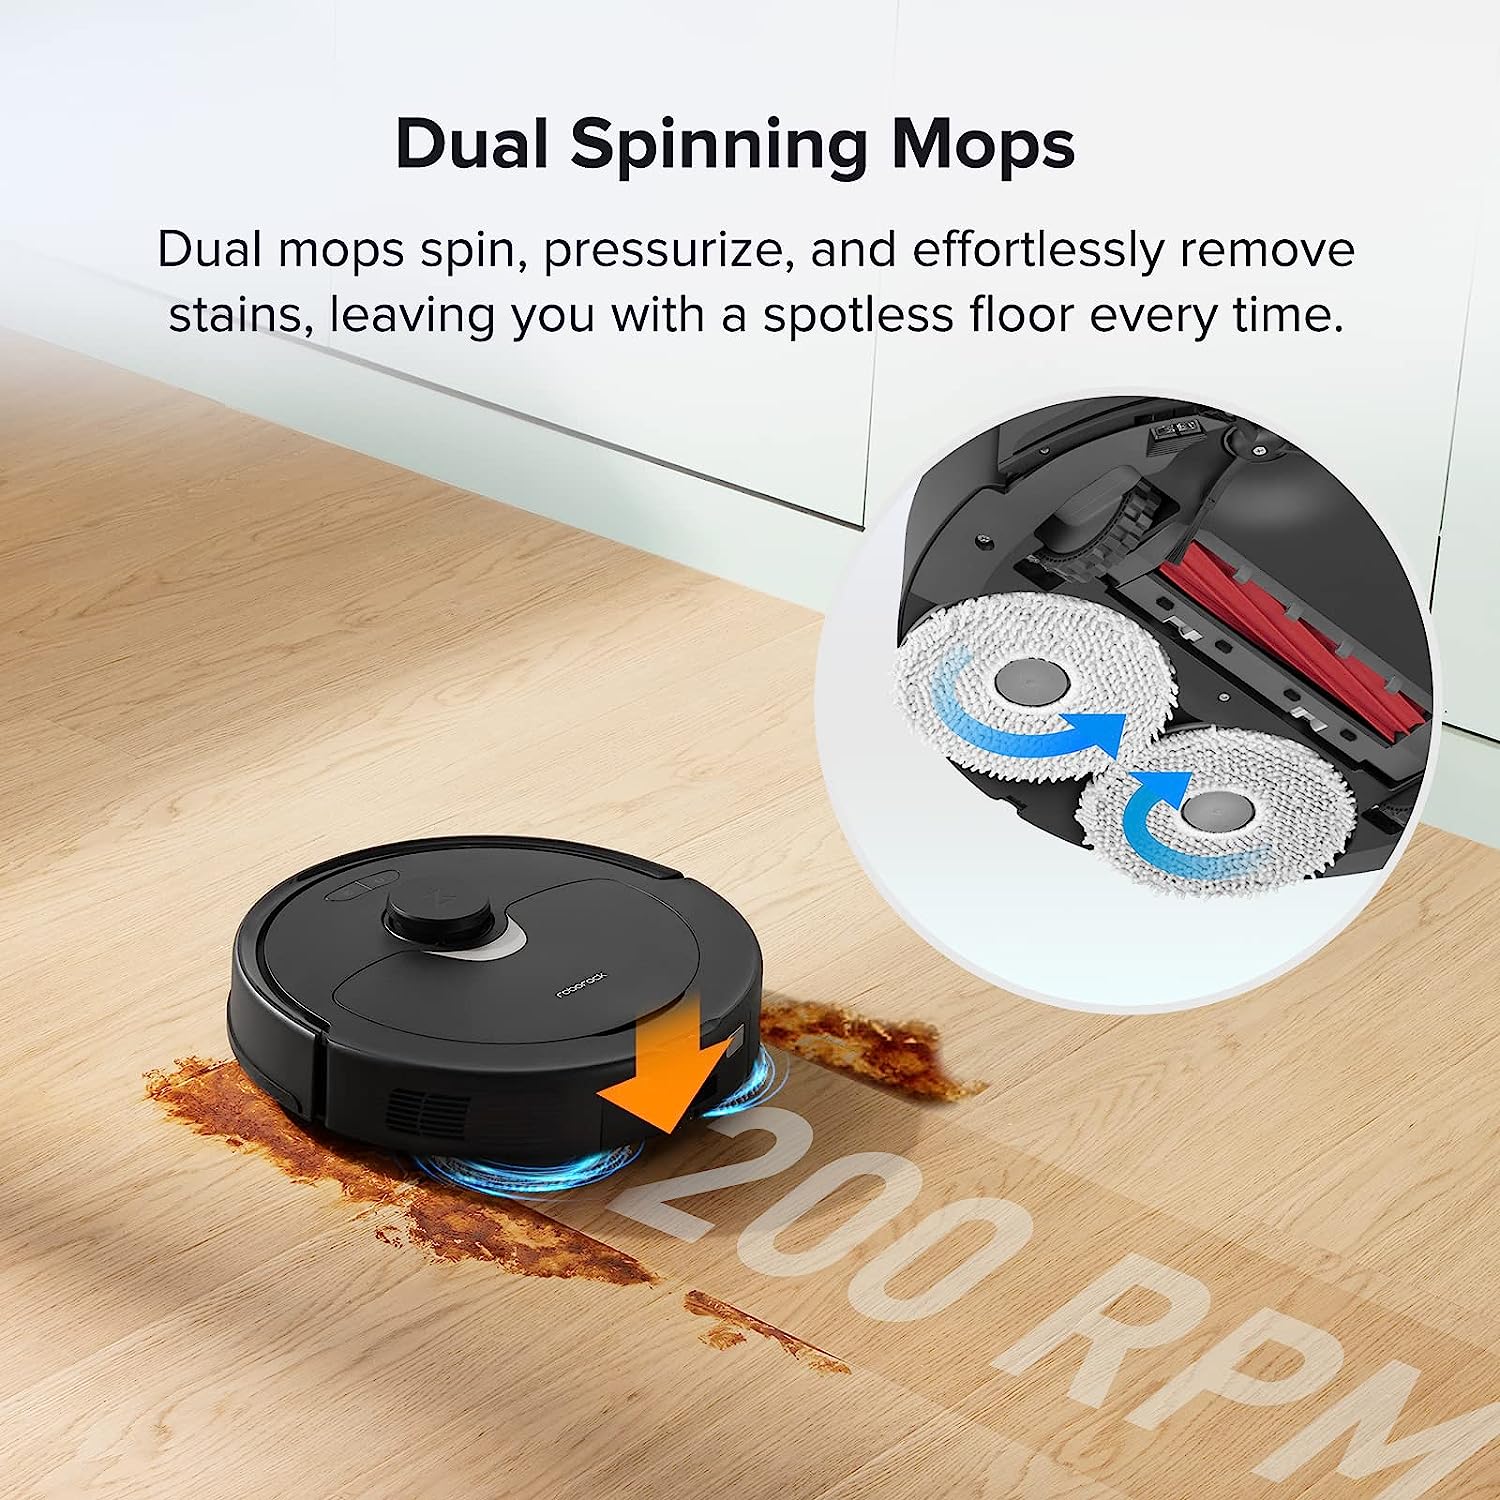 Roborock Robot Vacuum and Mop, Auto-Drying, Auto Mop Washing, Dual Spinning Mops, Auto Mop Lifting, Self-Refilling, Self-Emptying, Reactive Tech Obstacle Avoidance, 5500Pa Suction, Black